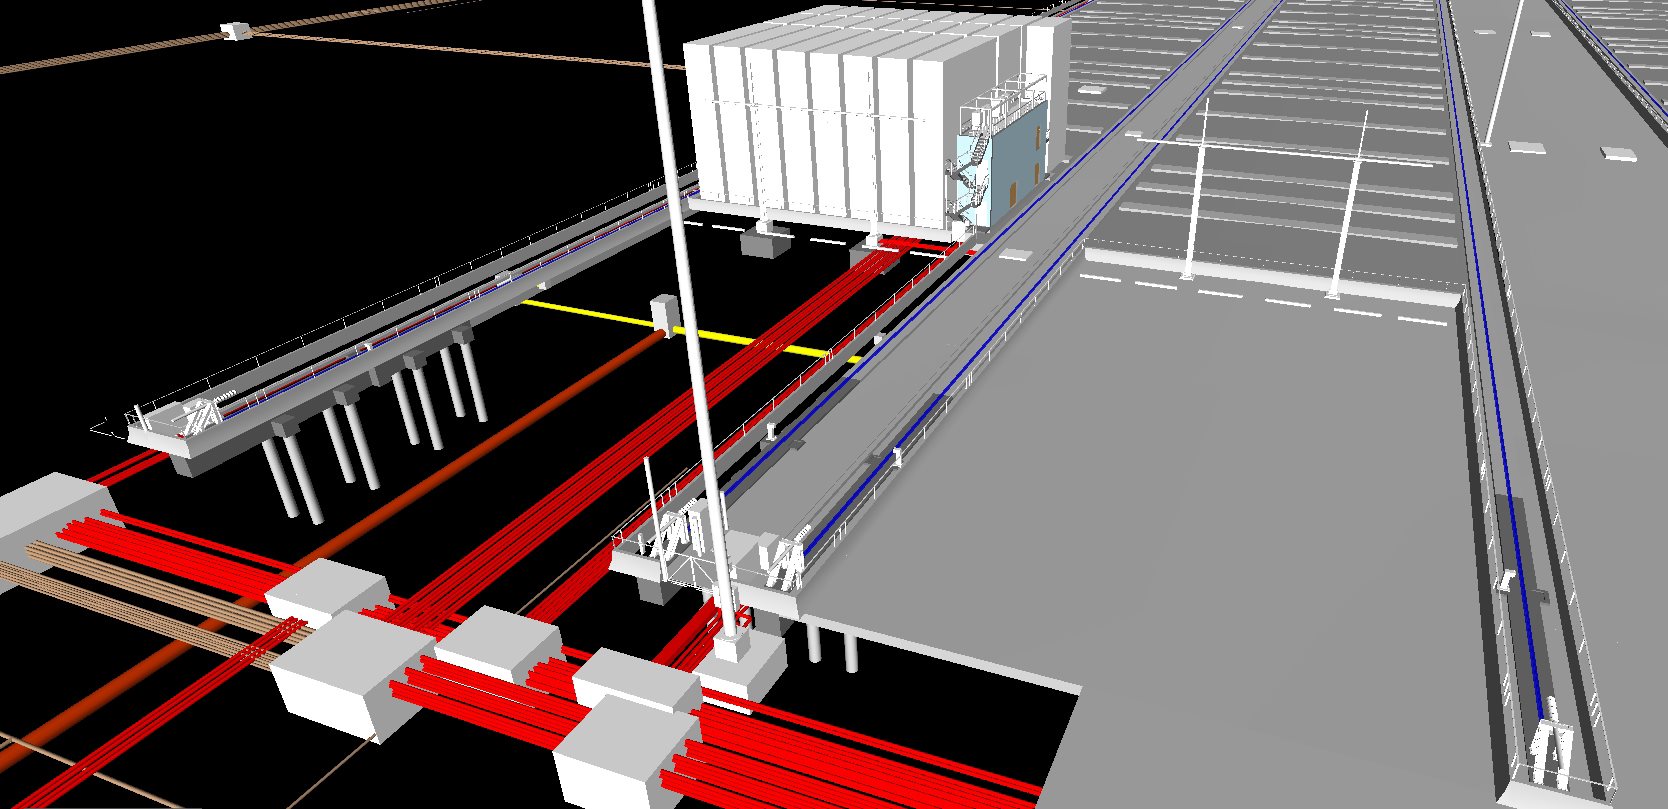 BIM image of the Caribbean container port yard with services coordination